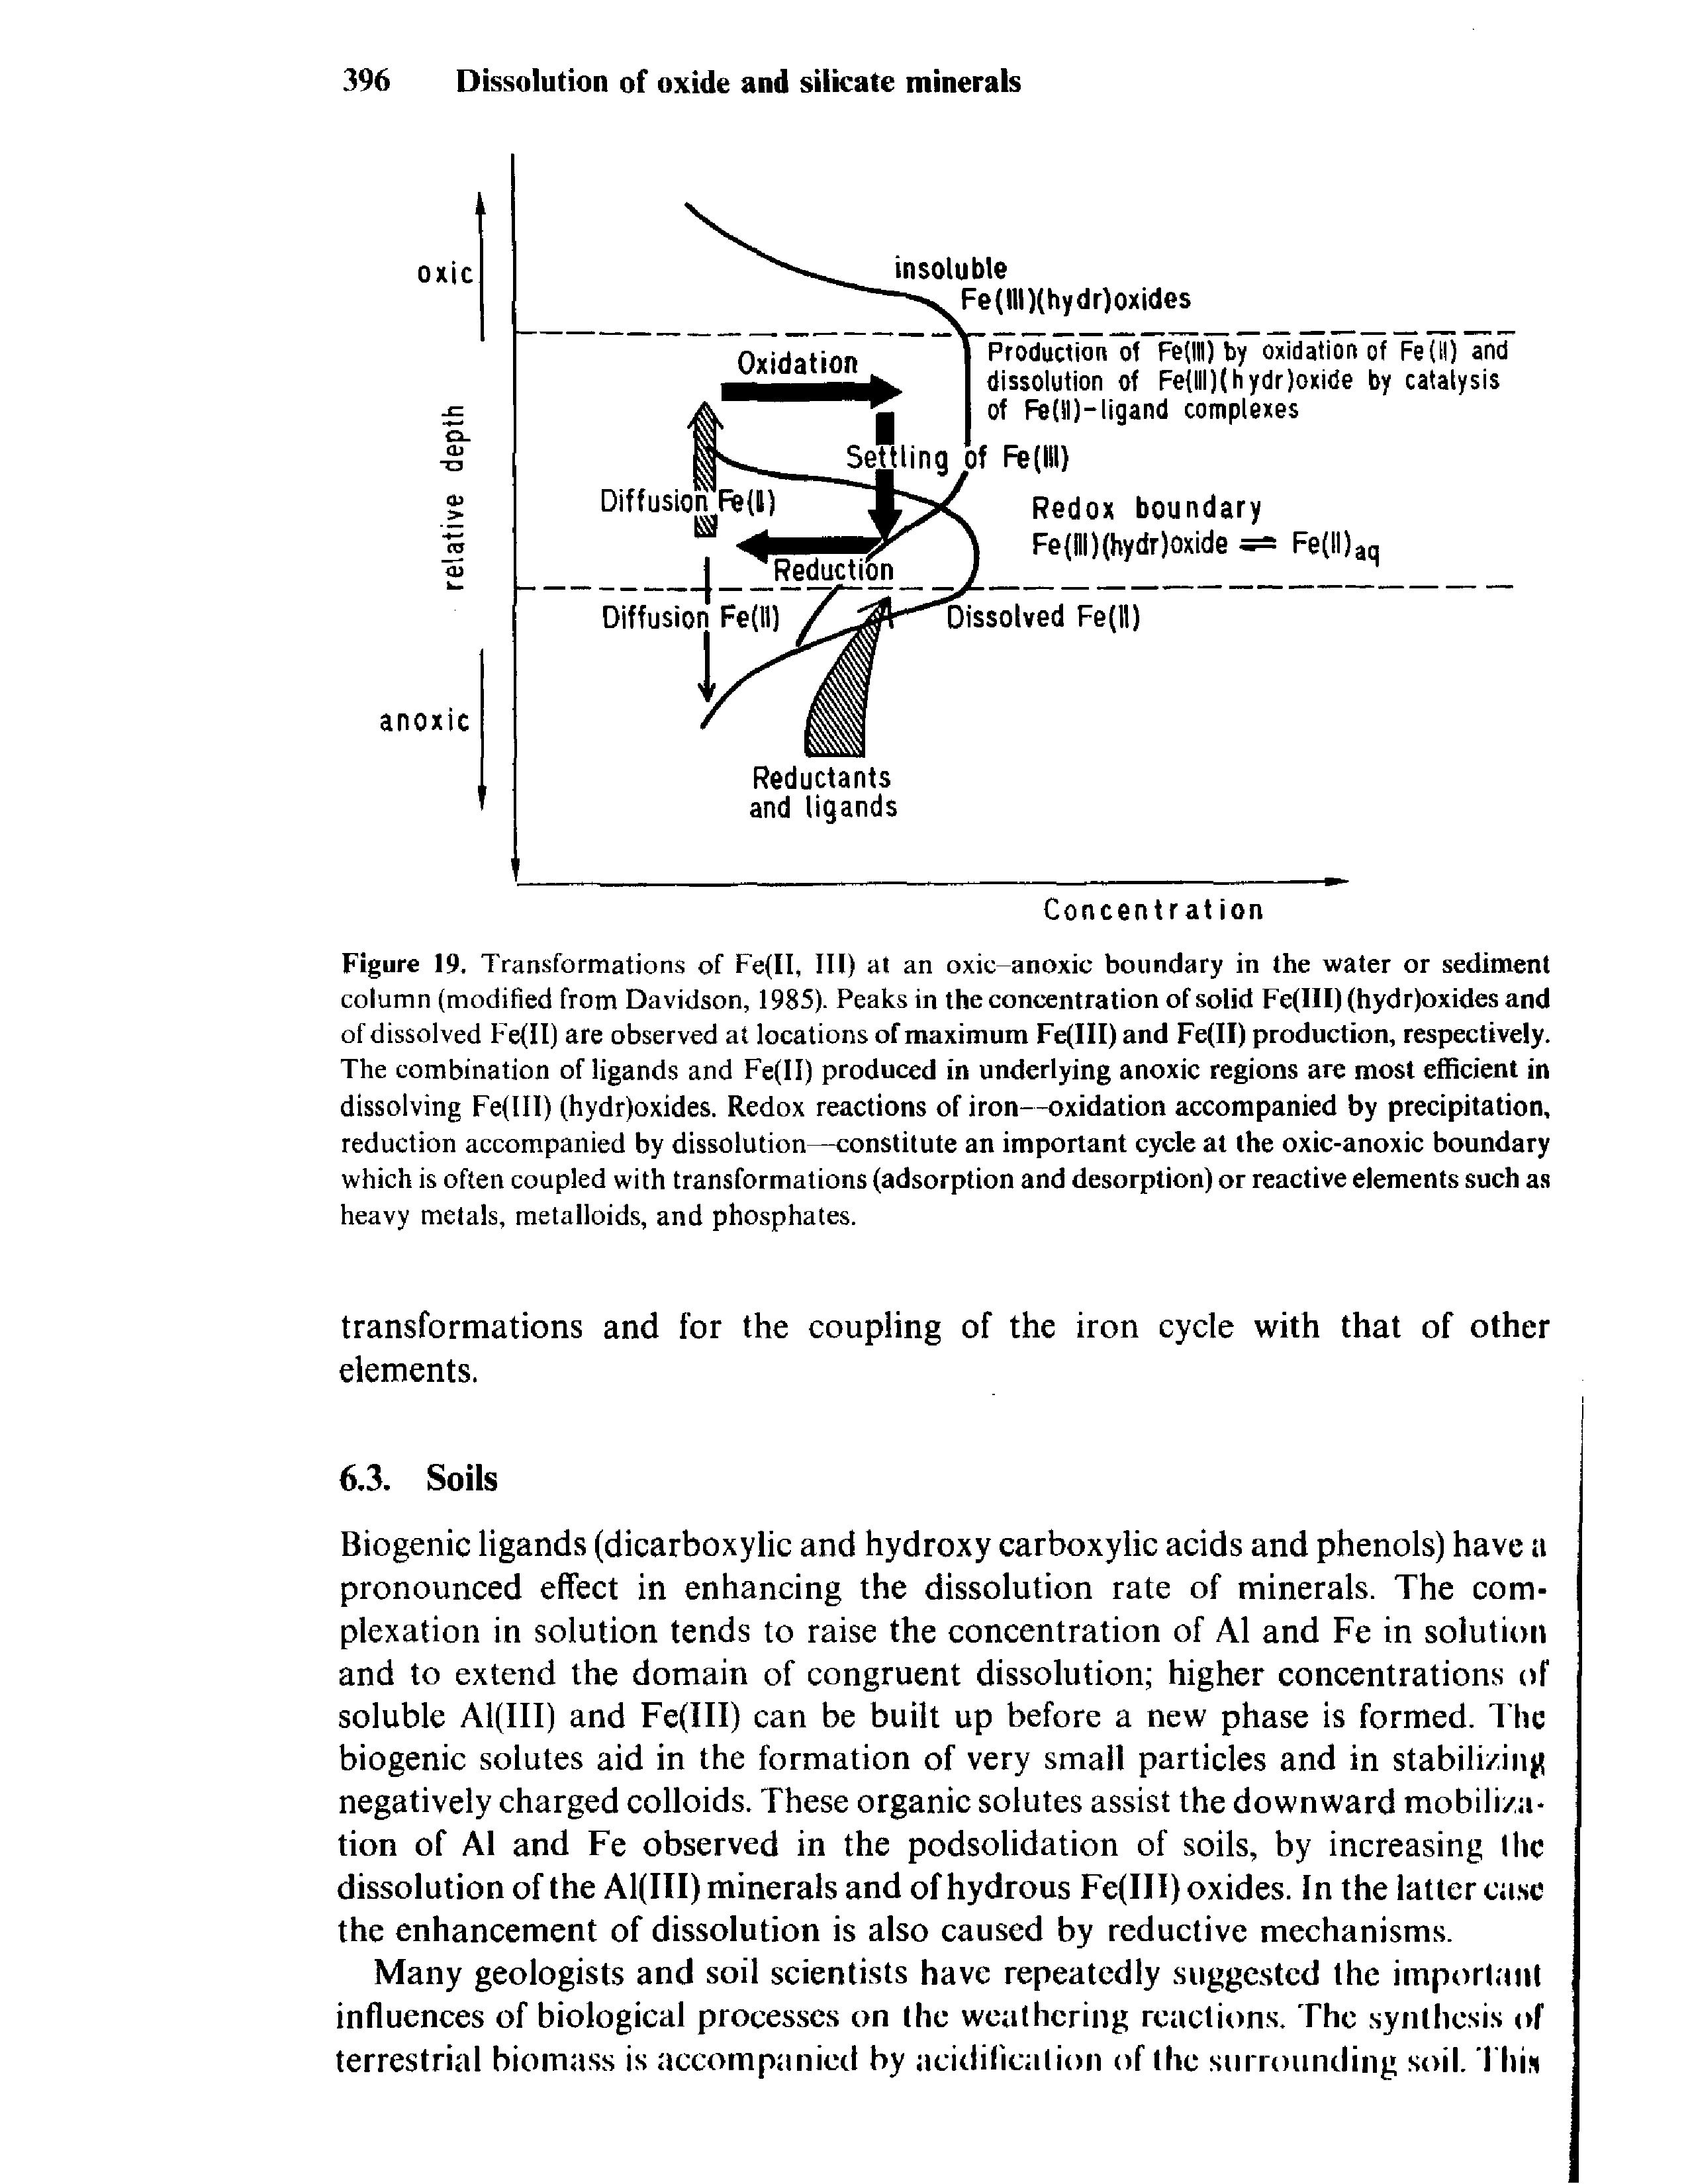 Figure 19. Transformations of Fe(II, III) at an oxic anoxic boundary in the water or sediment column (modified from Davidson, 1985). Peaks in the concentration of solid Fe(III) (hydr)oxides and of dissolved Fe II) are observed at locations of maximum Fe(III) and Fe(II) production, respectively. The combination of ligands and Fe(ll) produced in underlying anoxic regions are most efficient in dissolving Fe(III) (hydr)oxides. Redox reactions of iron—oxidation accompanied by precipitation, reduction accompanied by dissolution—constitute an important cycle at the oxic-anoxic boundary which is often coupled with transformations (adsorption and desorption) or reactive elements such as heavy metals, metalloids, and phosphates.